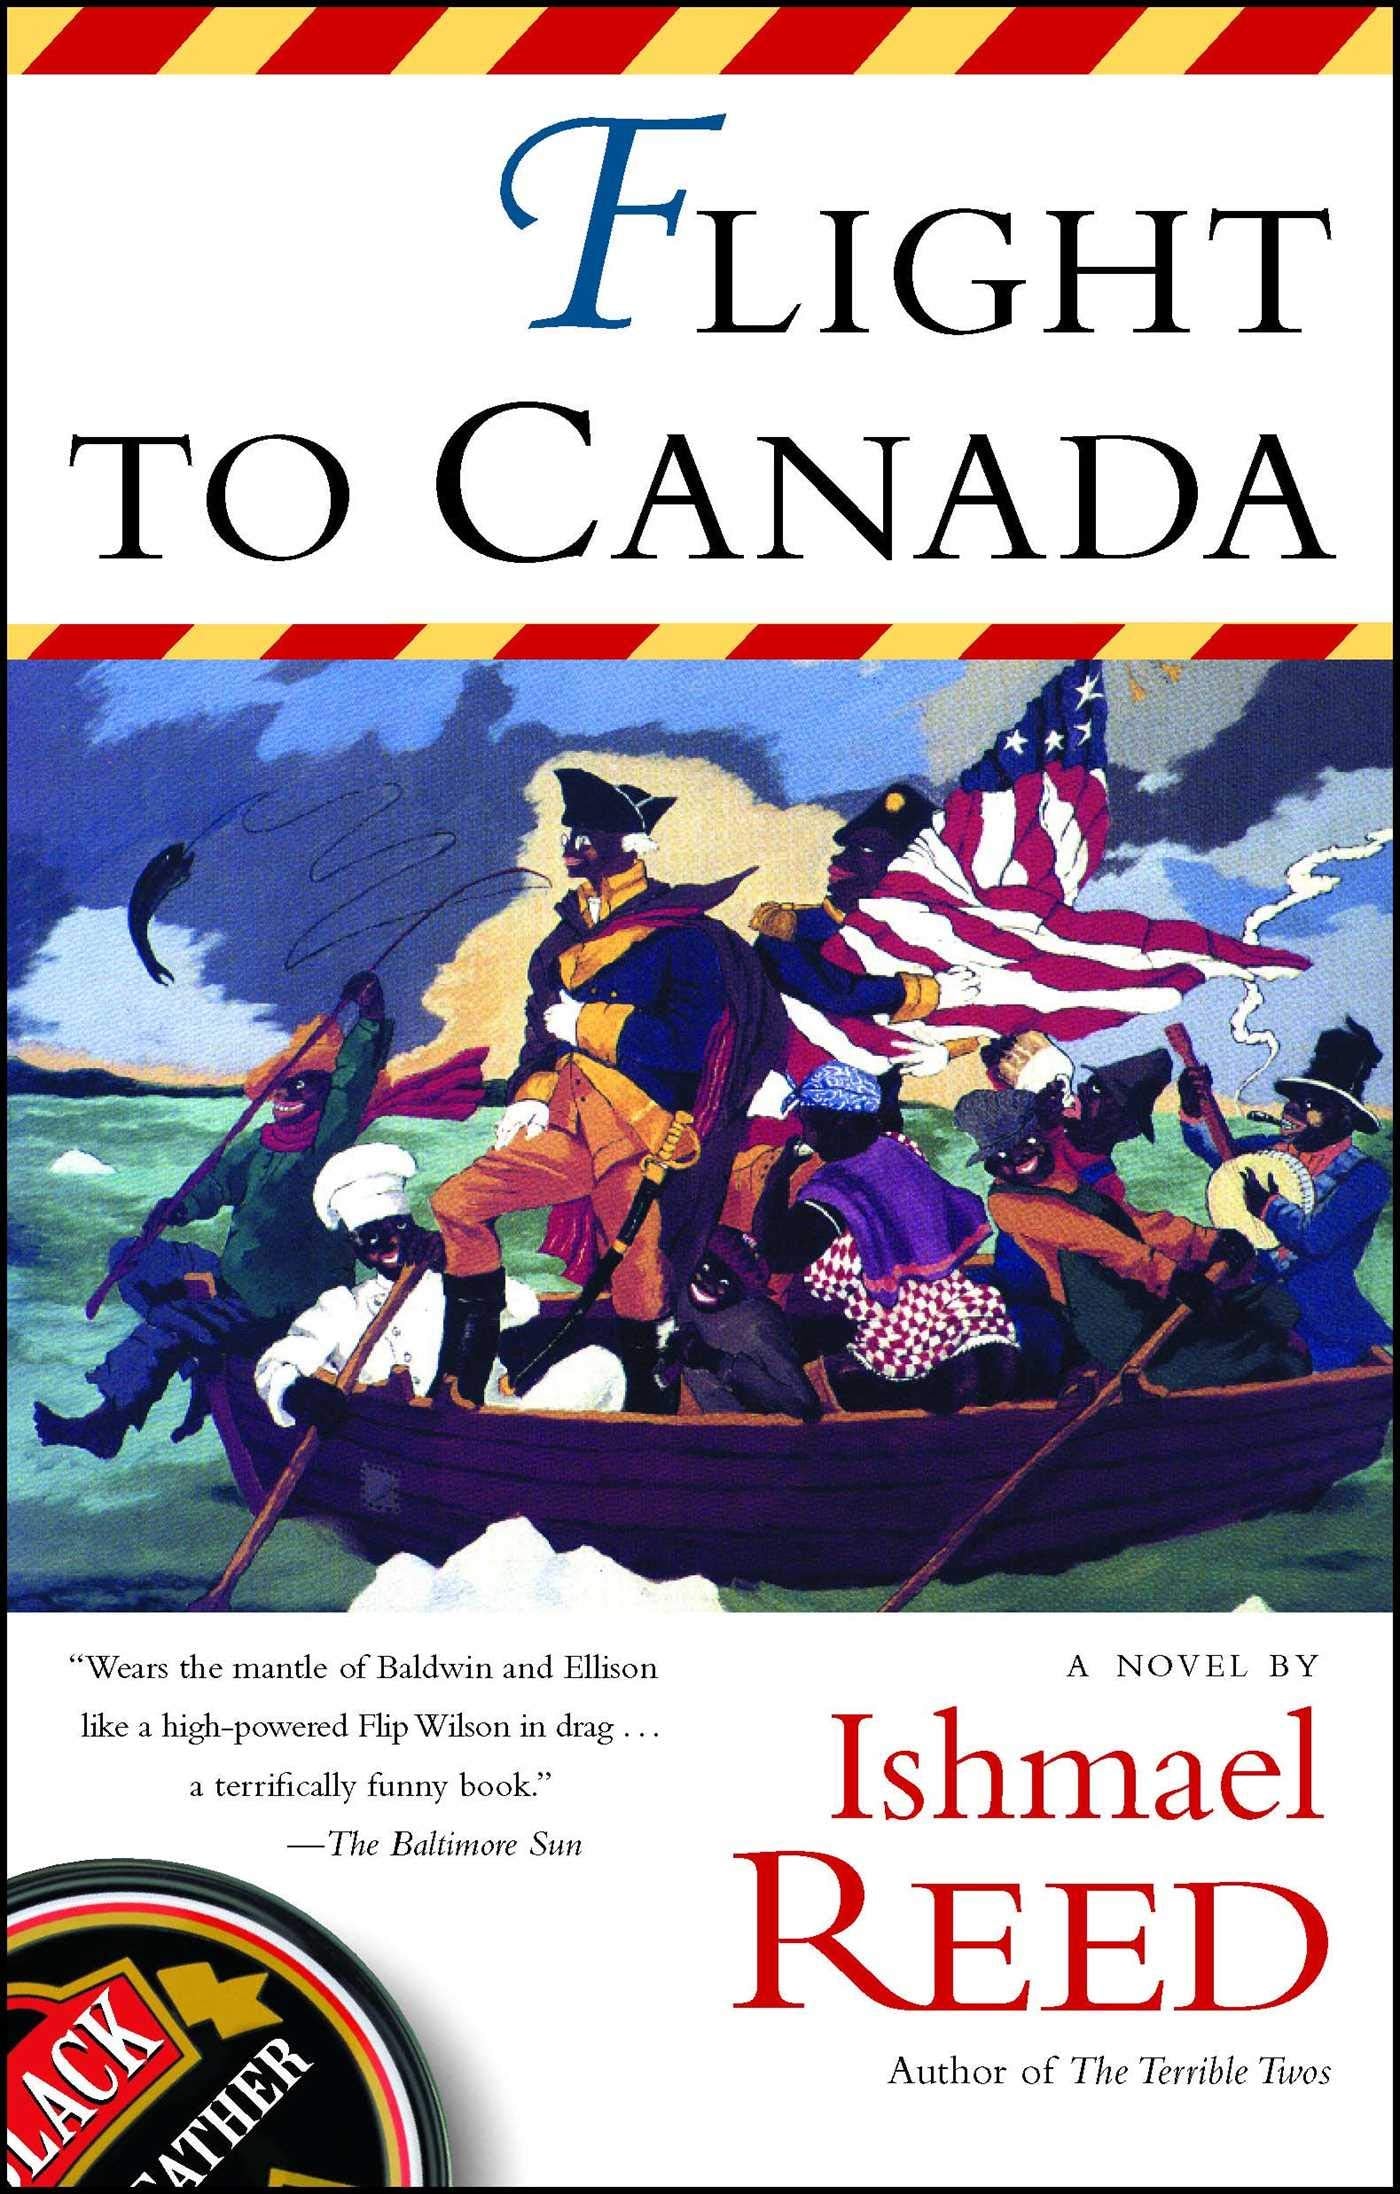 Flight to Canada, by Ishmael Reed